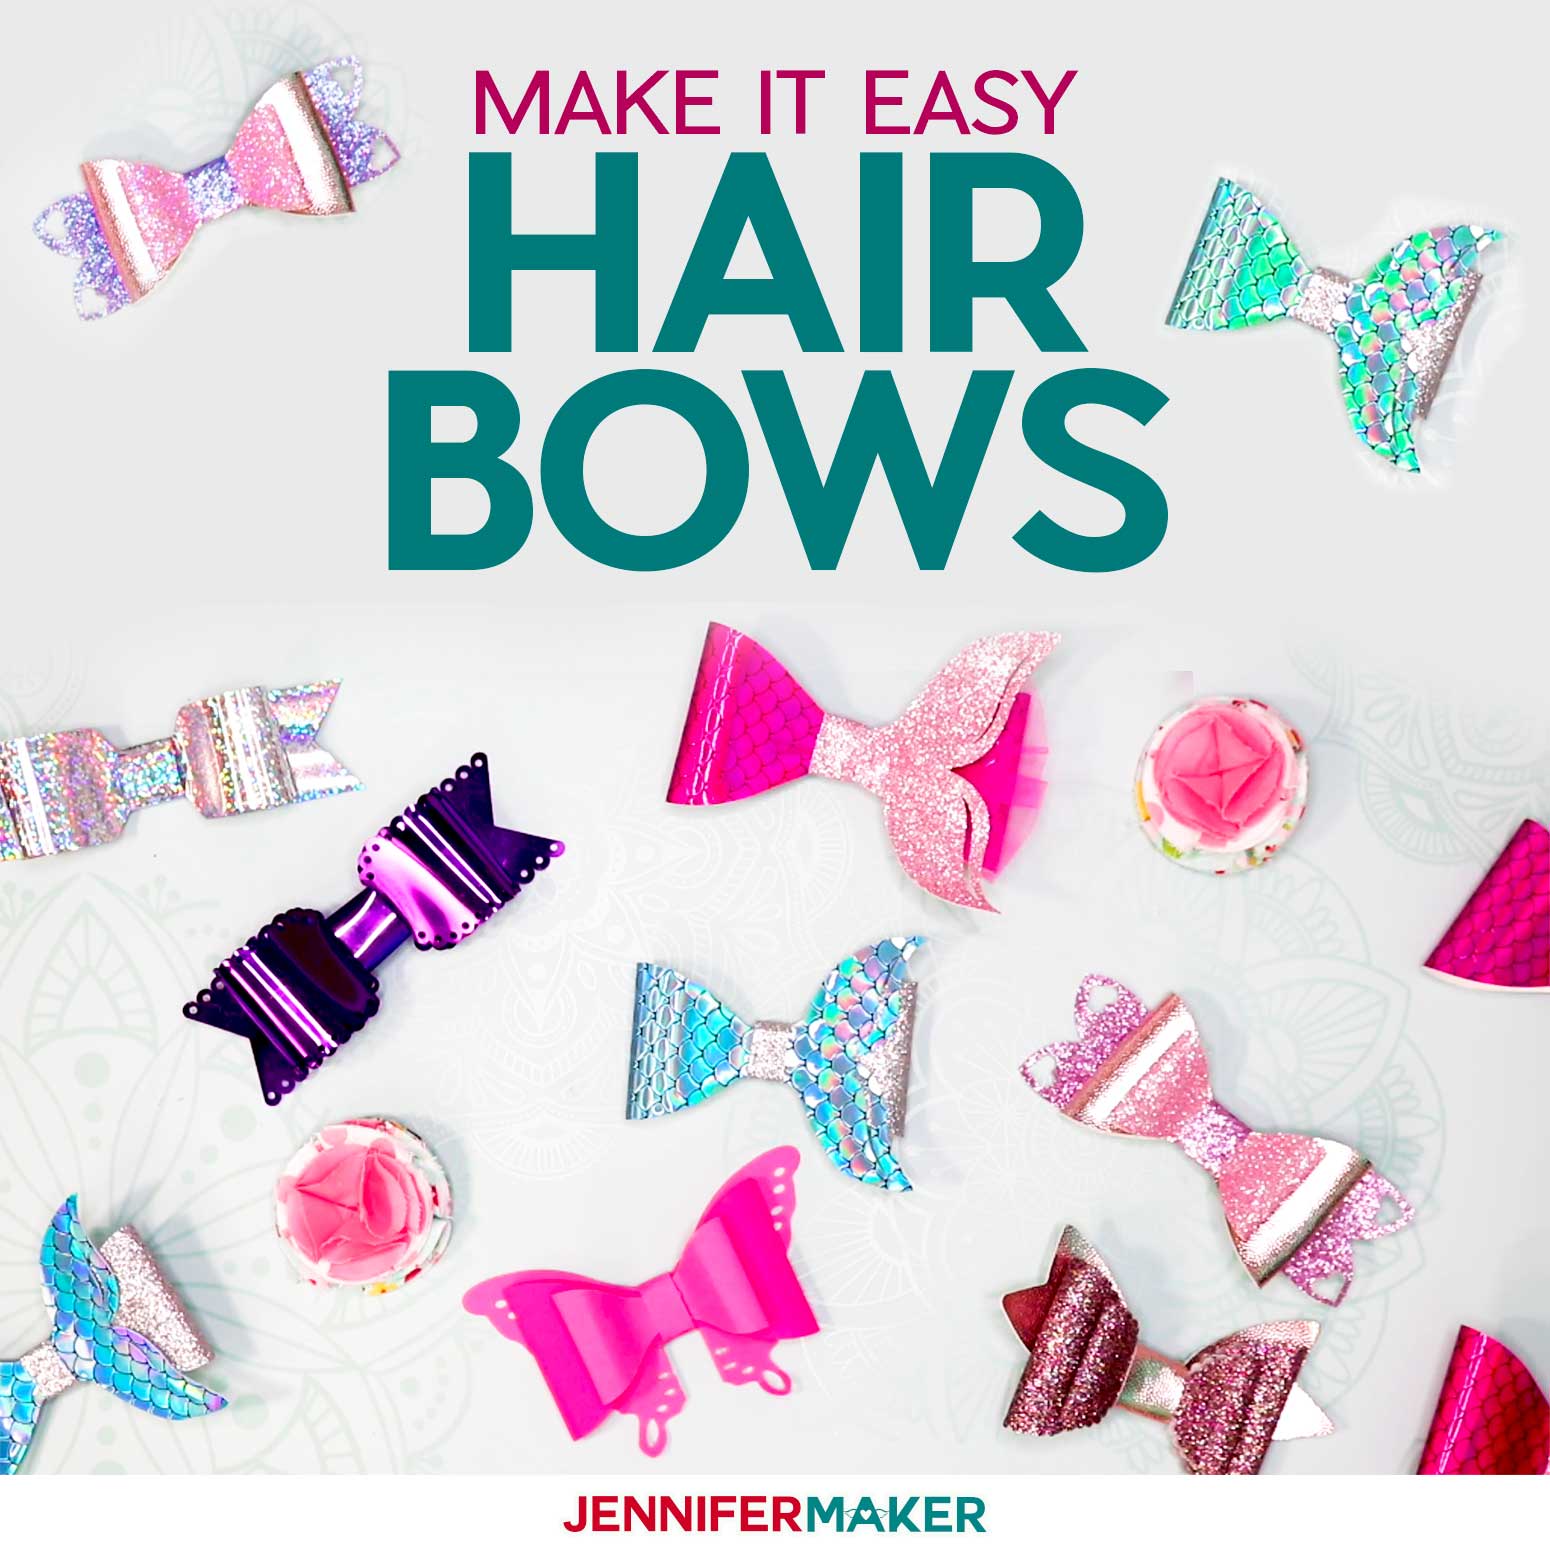 Make Hair Bows with Mermaid Tails, Butterfly Wings, and Hearts!